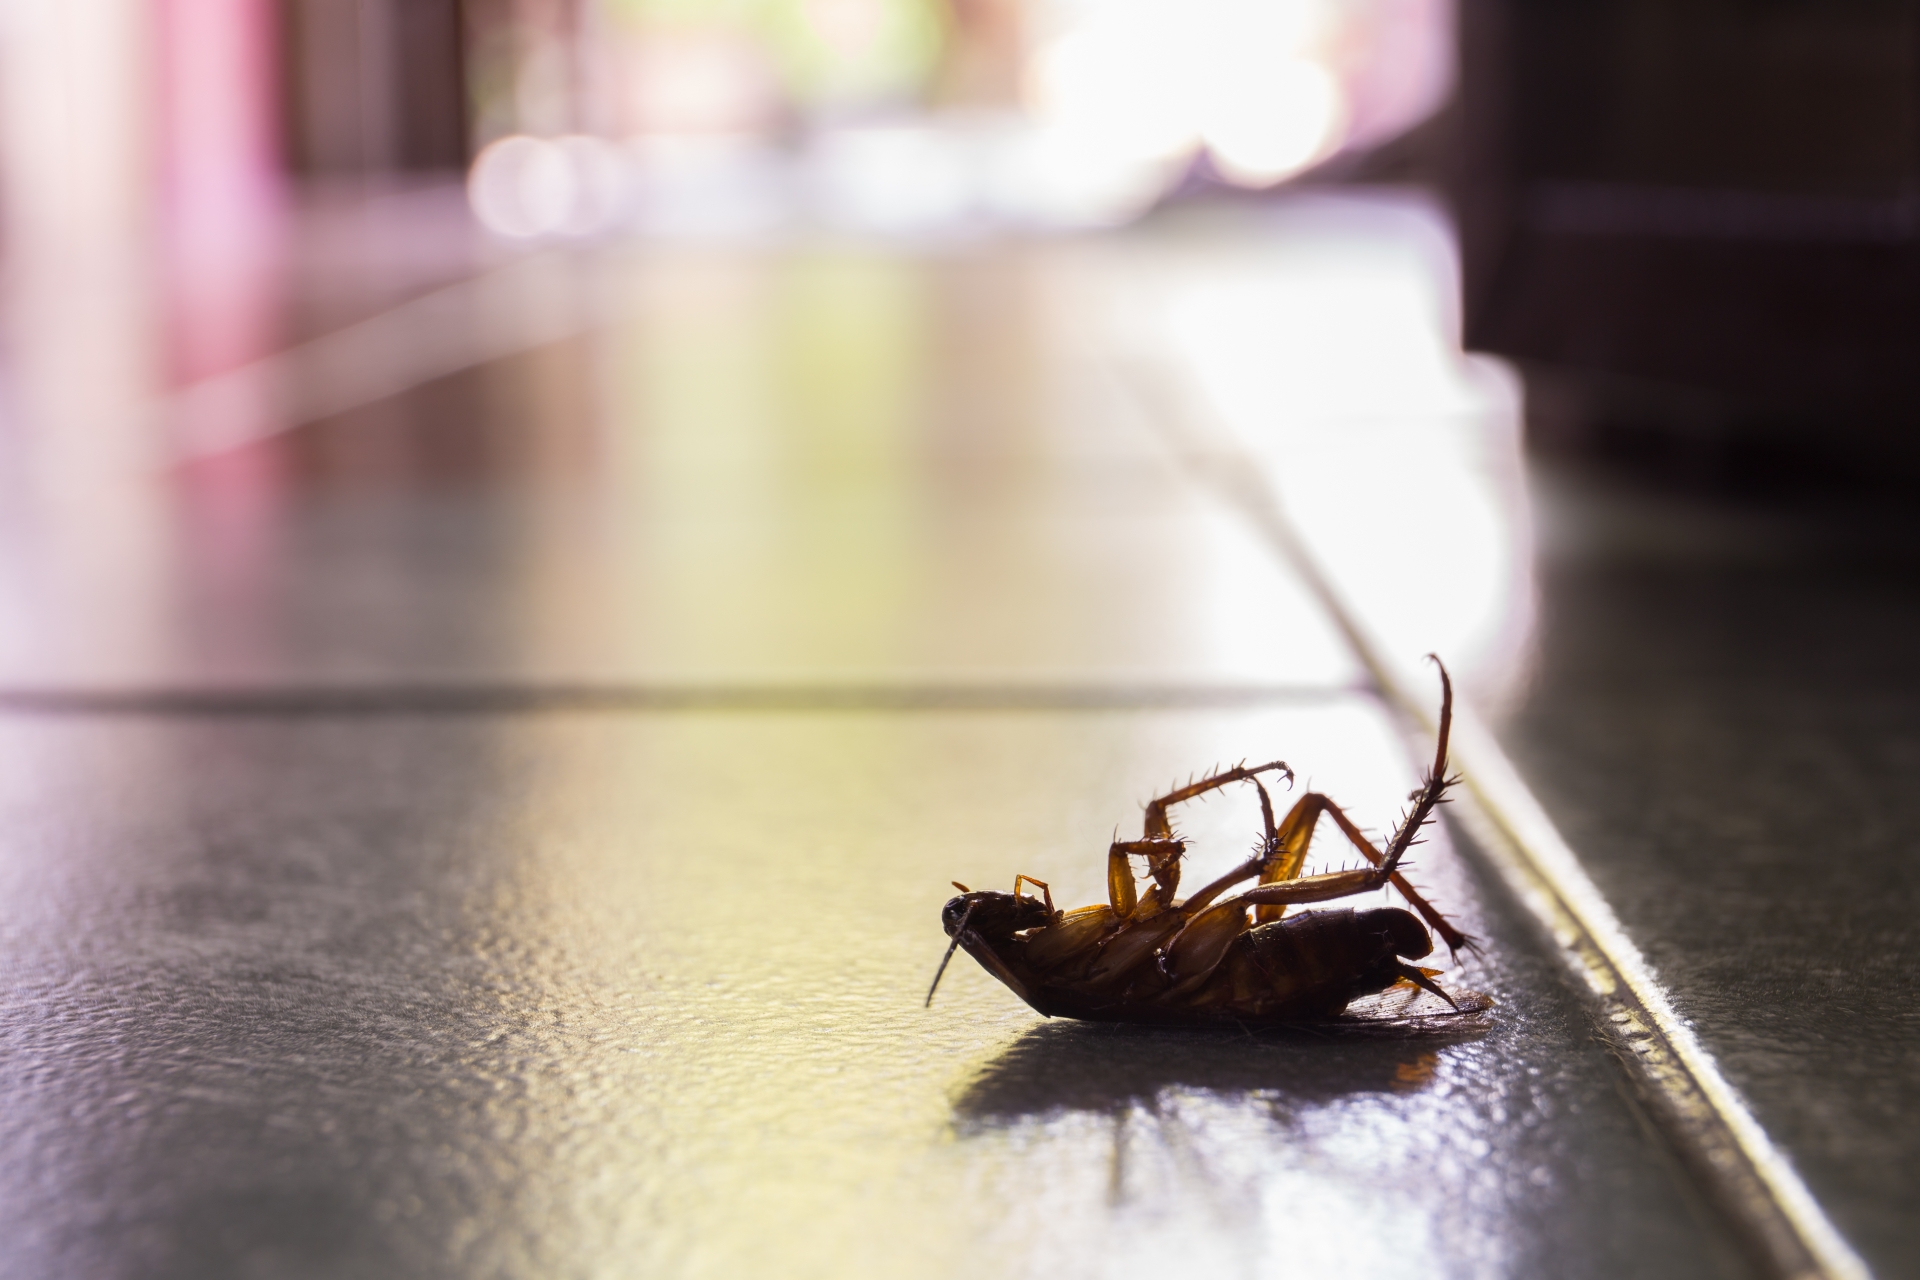 Cockroach Control, Pest Control in Chertsey, Ottershaw, Longcross, KT16. Call Now 020 8166 9746